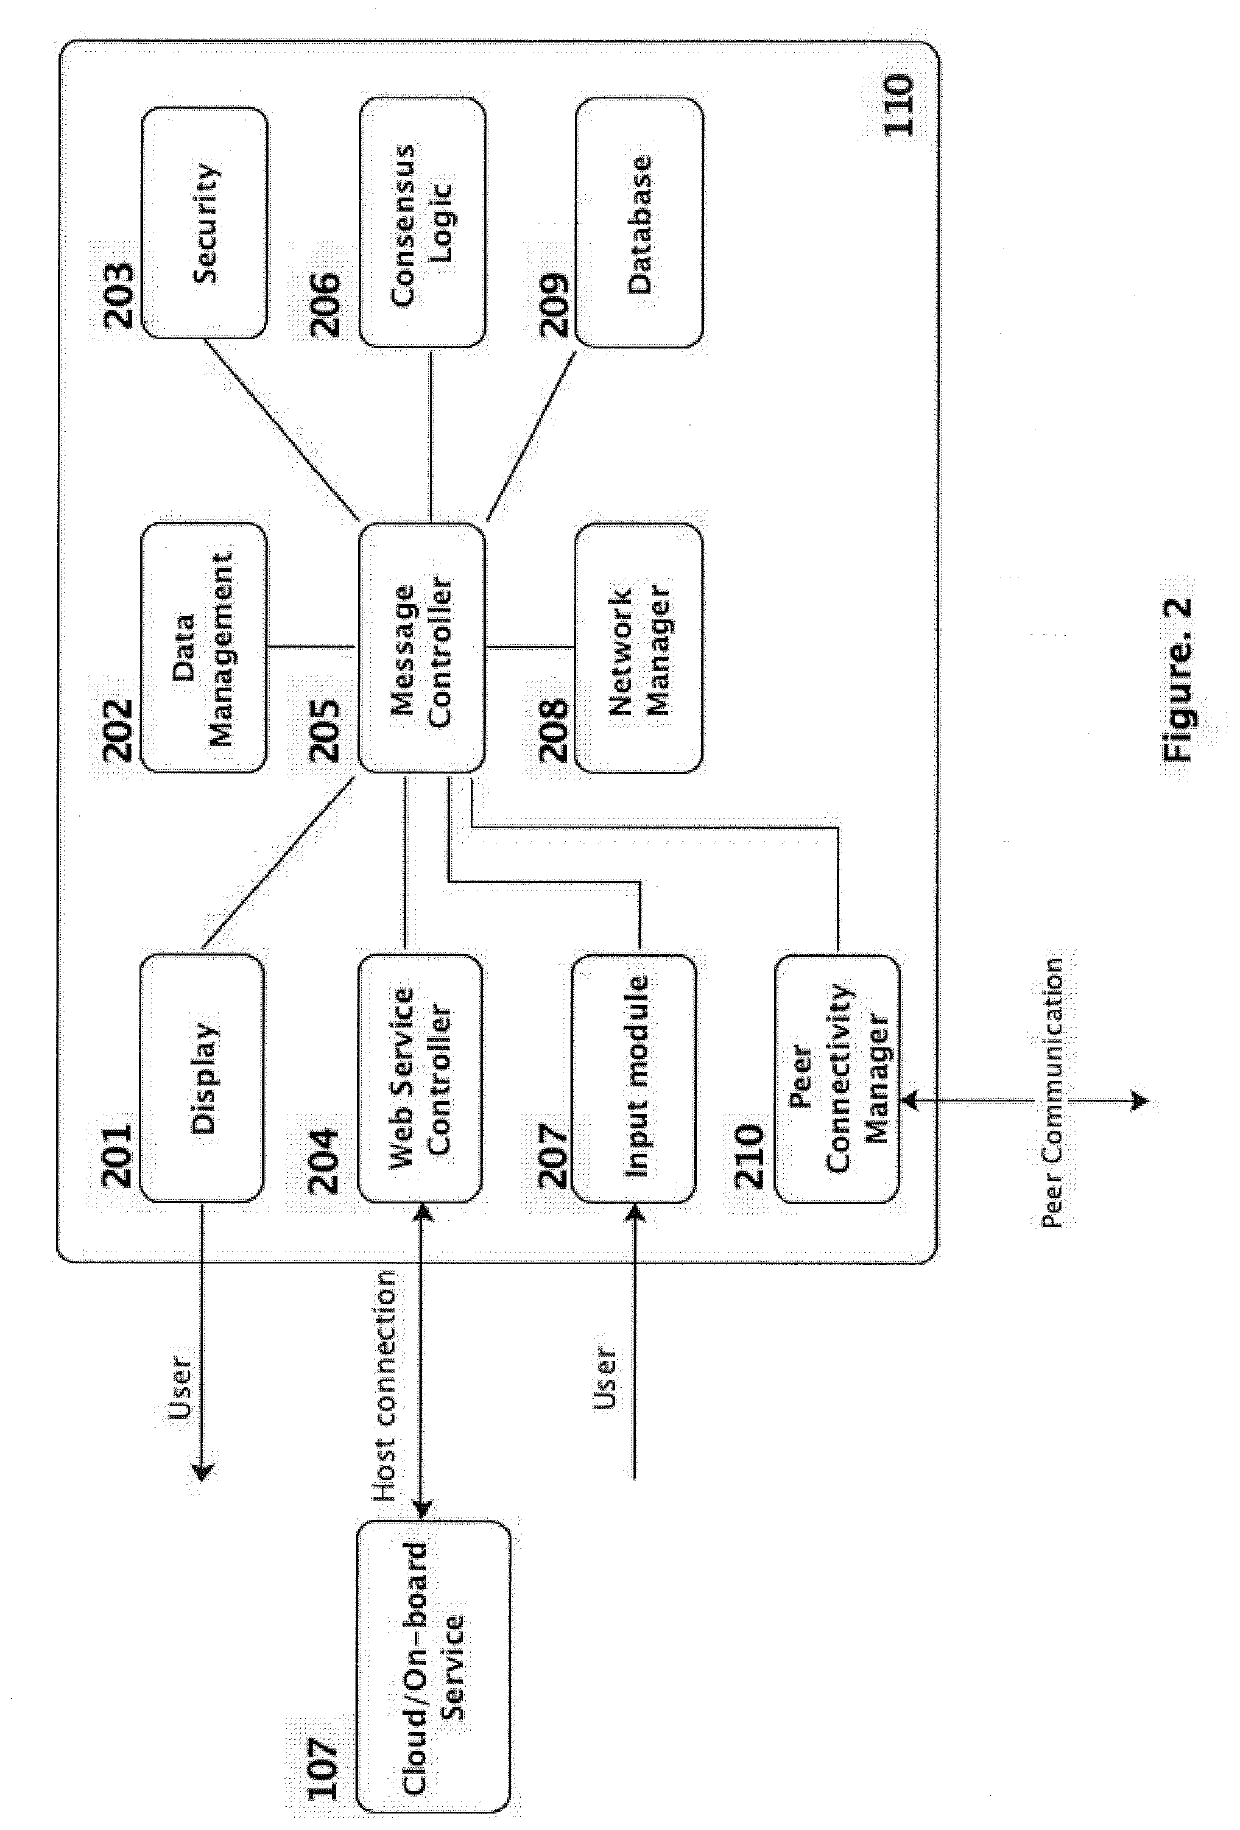 Method and network to implement peer-to-peer data synchronization between electronic flight bags